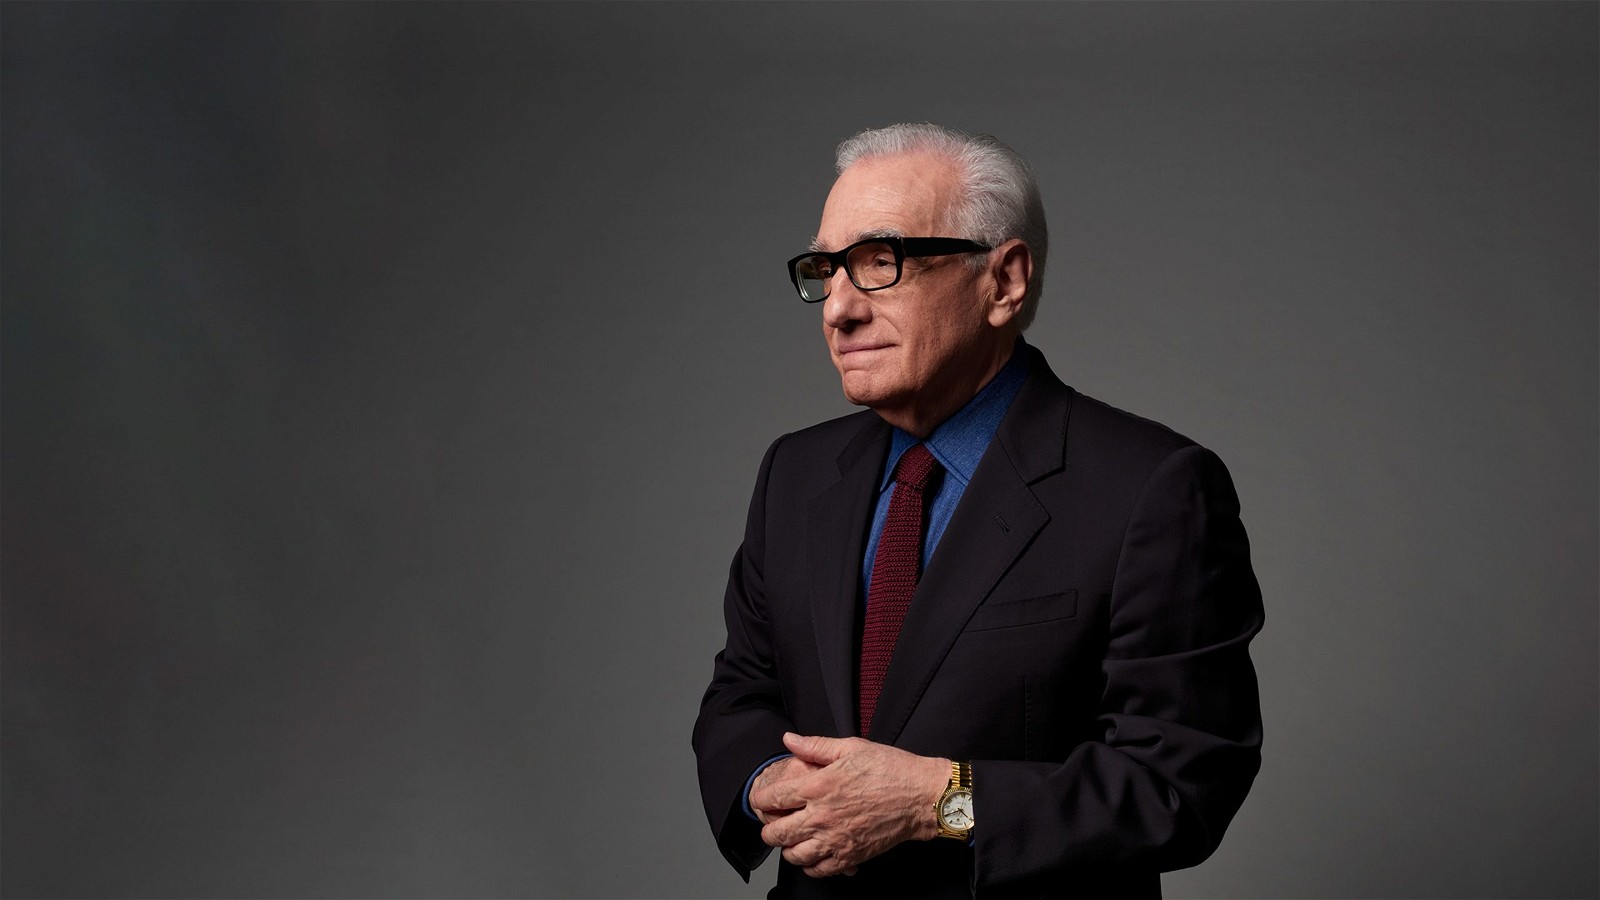 Martin Scorsese charged with cinematic self-indulgence and debased talents by film critic